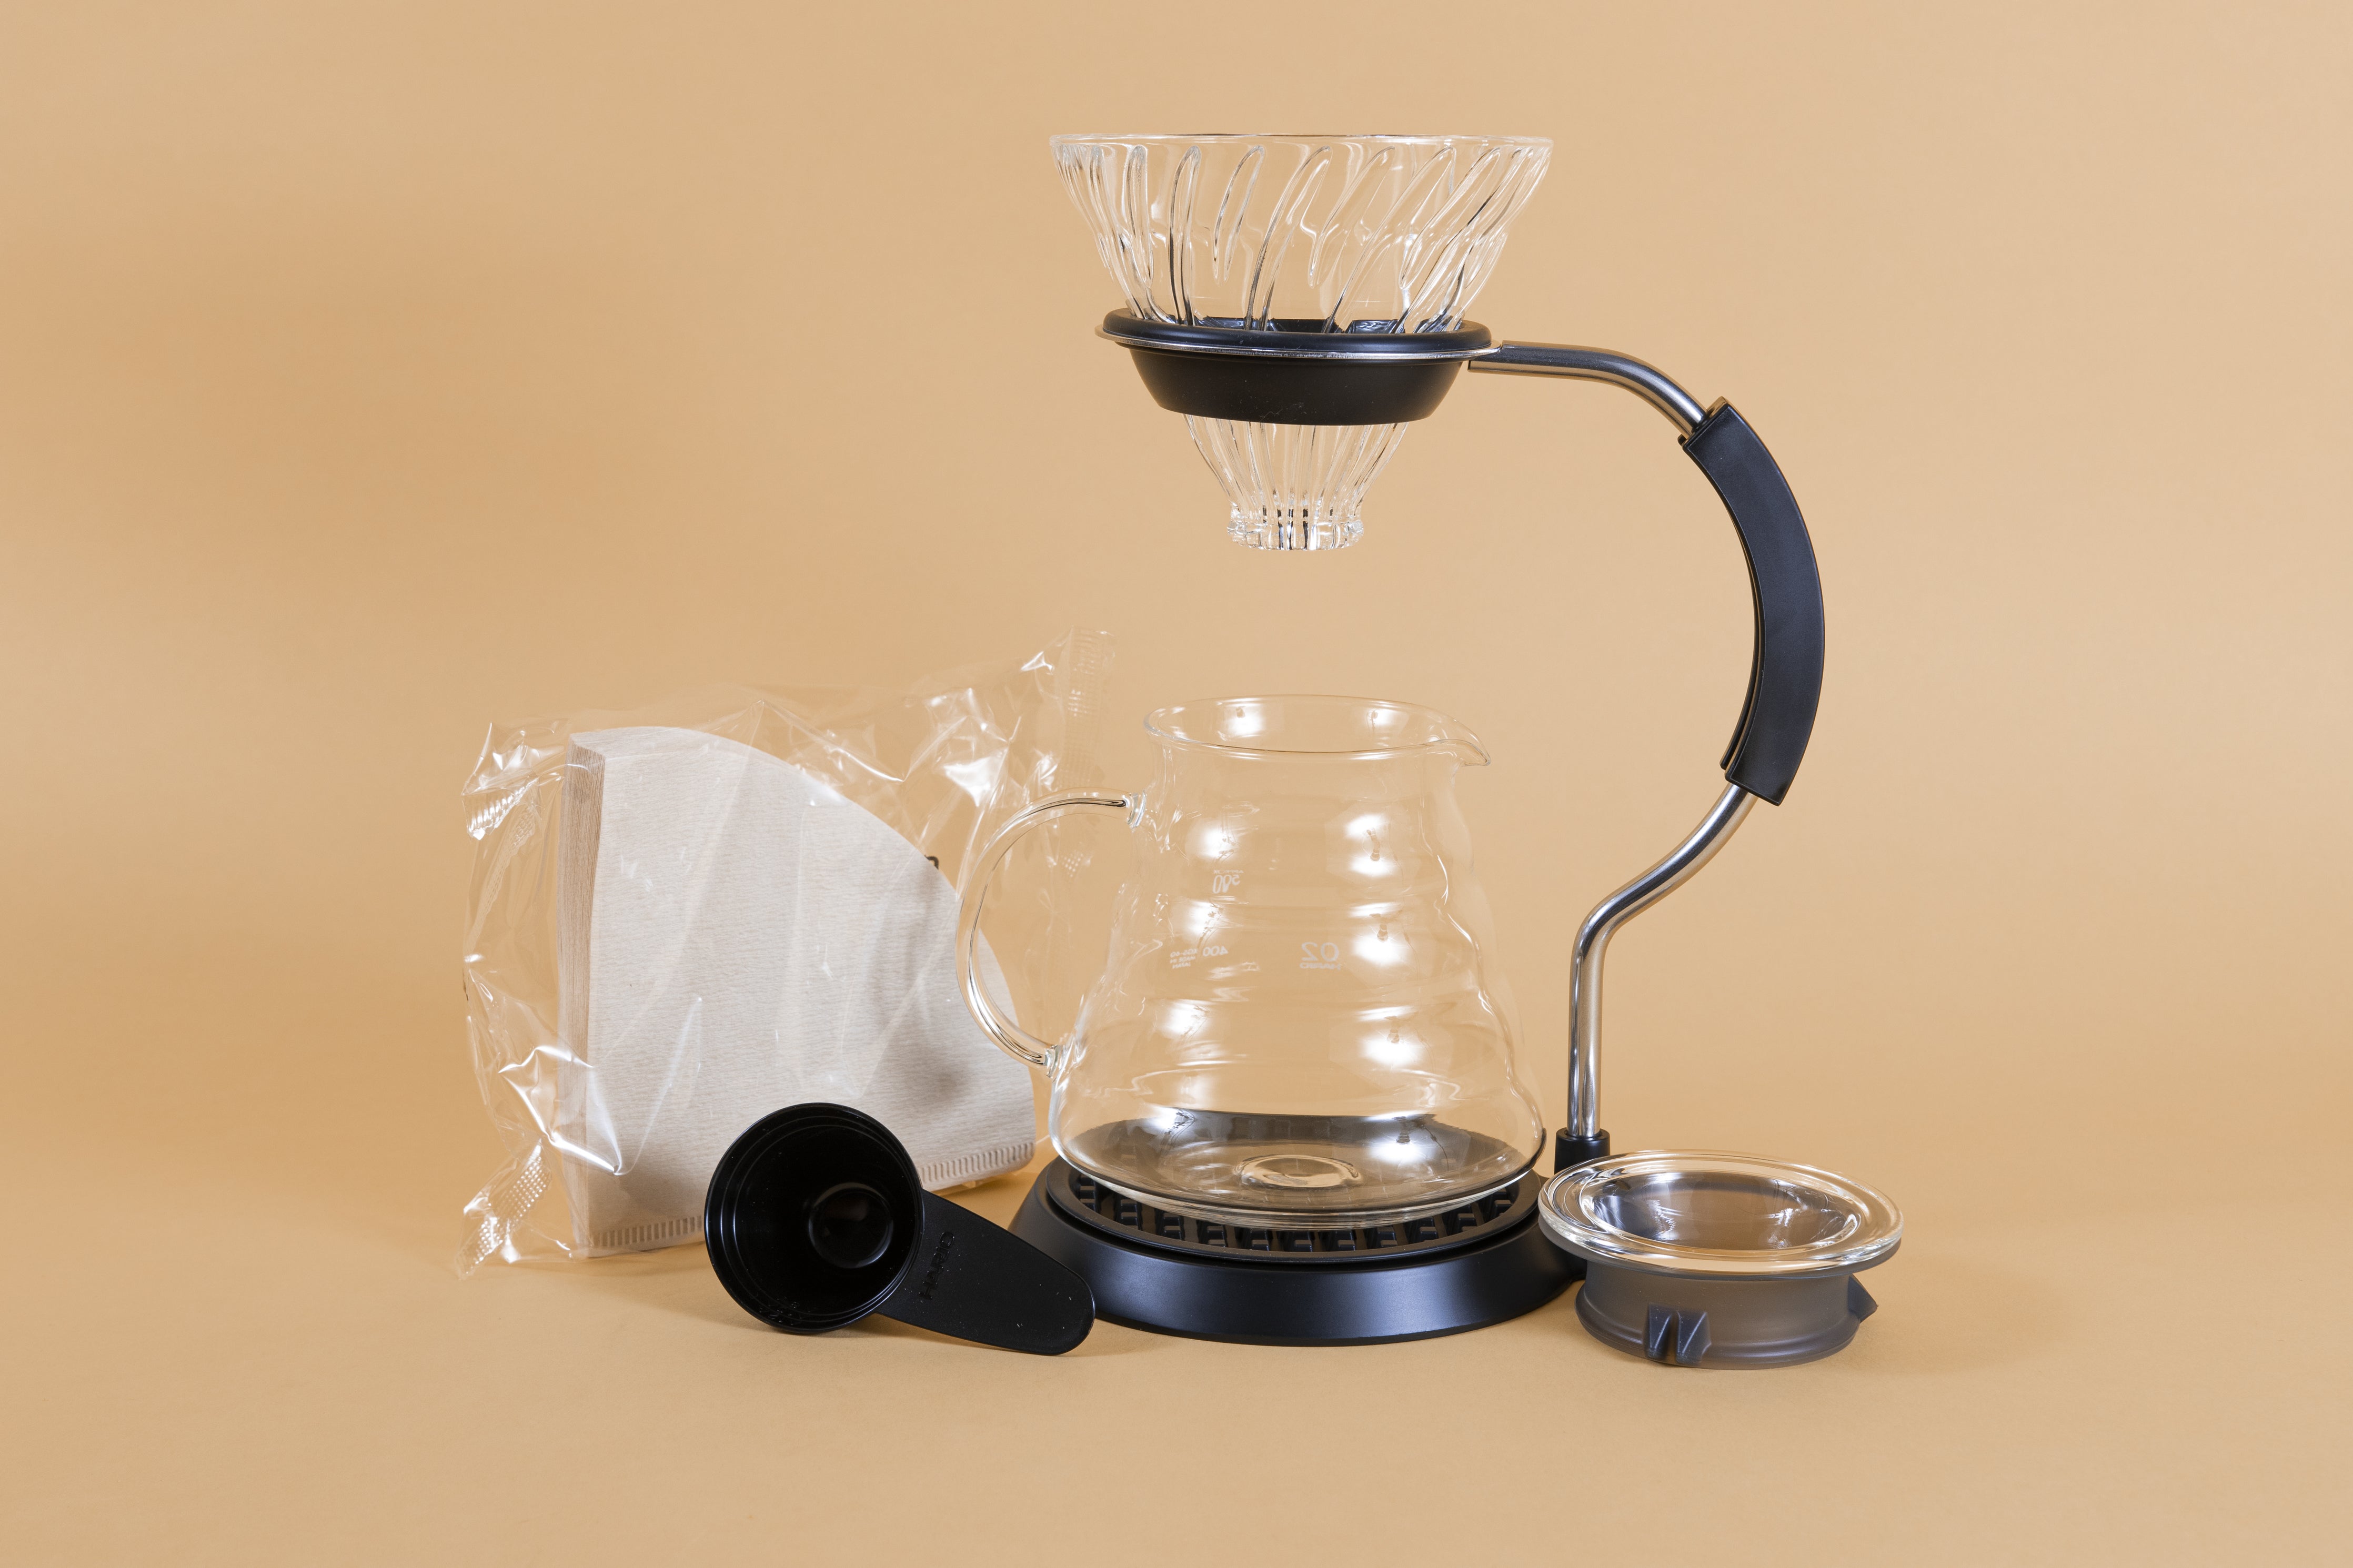 v60 - Advantage of Dual Scale Setups for Pour Over? - Coffee Stack Exchange